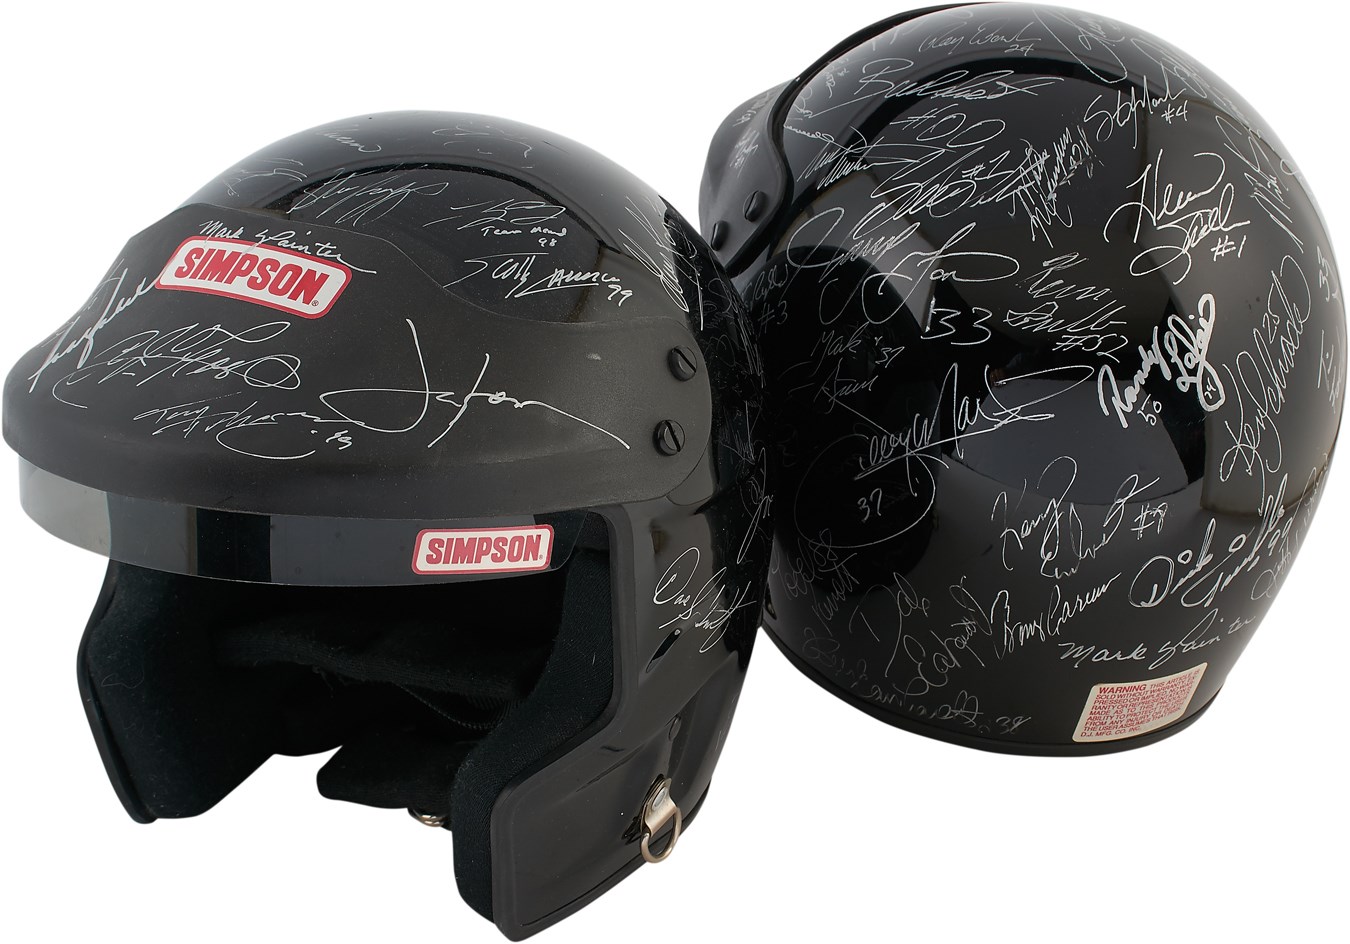 Olympics and All Sports - NASCAR Stars of Past and Present Signed Helmets